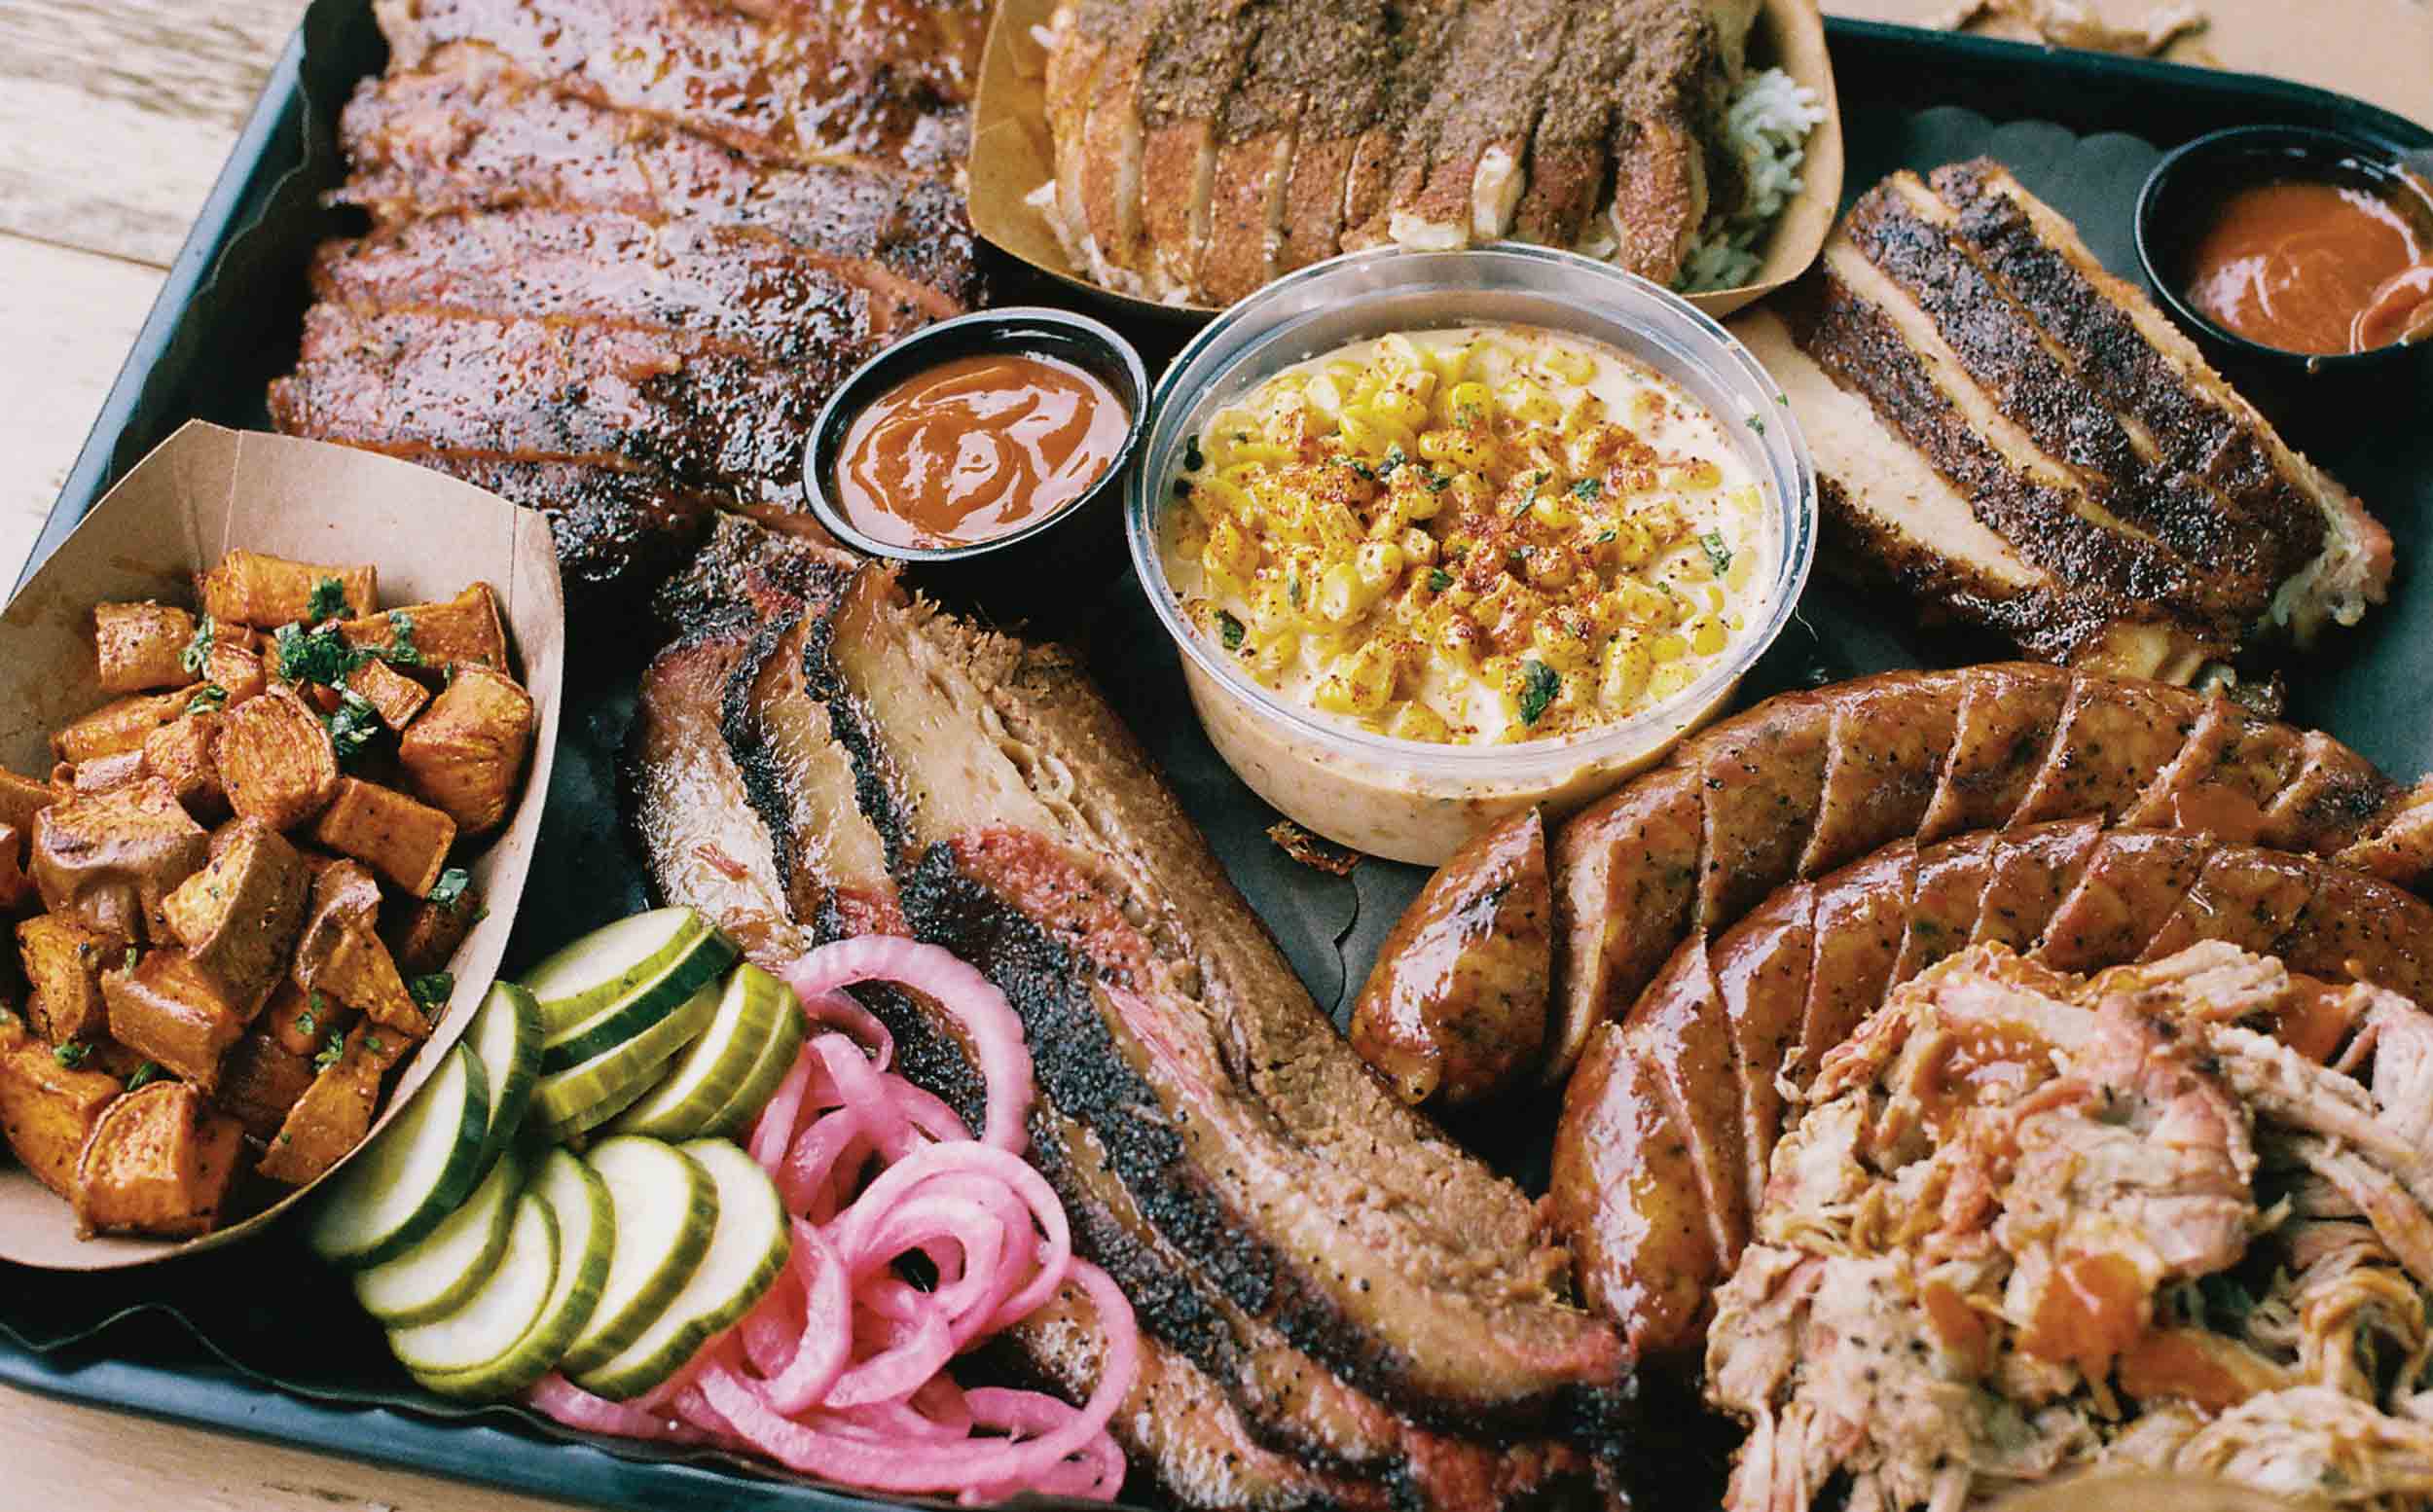 The 10 Best Barbecue Smokers in 2021, According to Customer Reviews